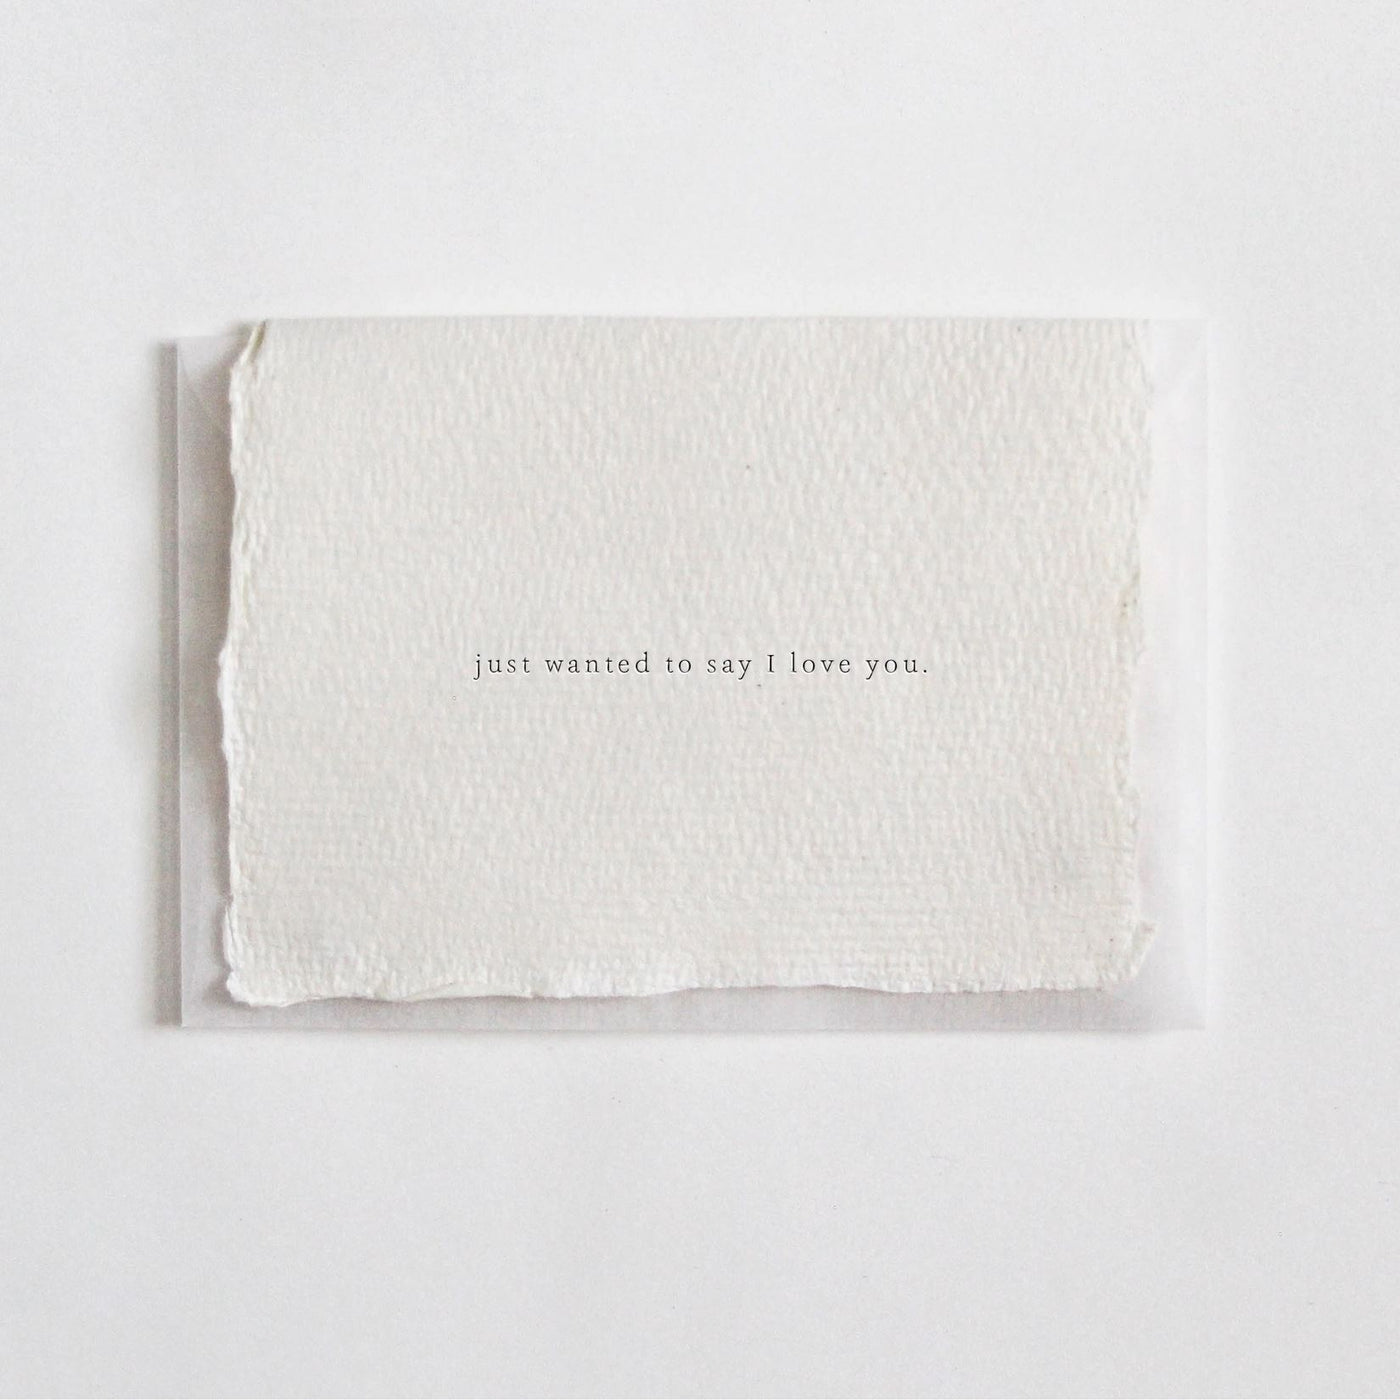 JUST WANTED TO SAY I LOVE YOU MINI CARD | Greeting & Note card | LOSHEN & CREM